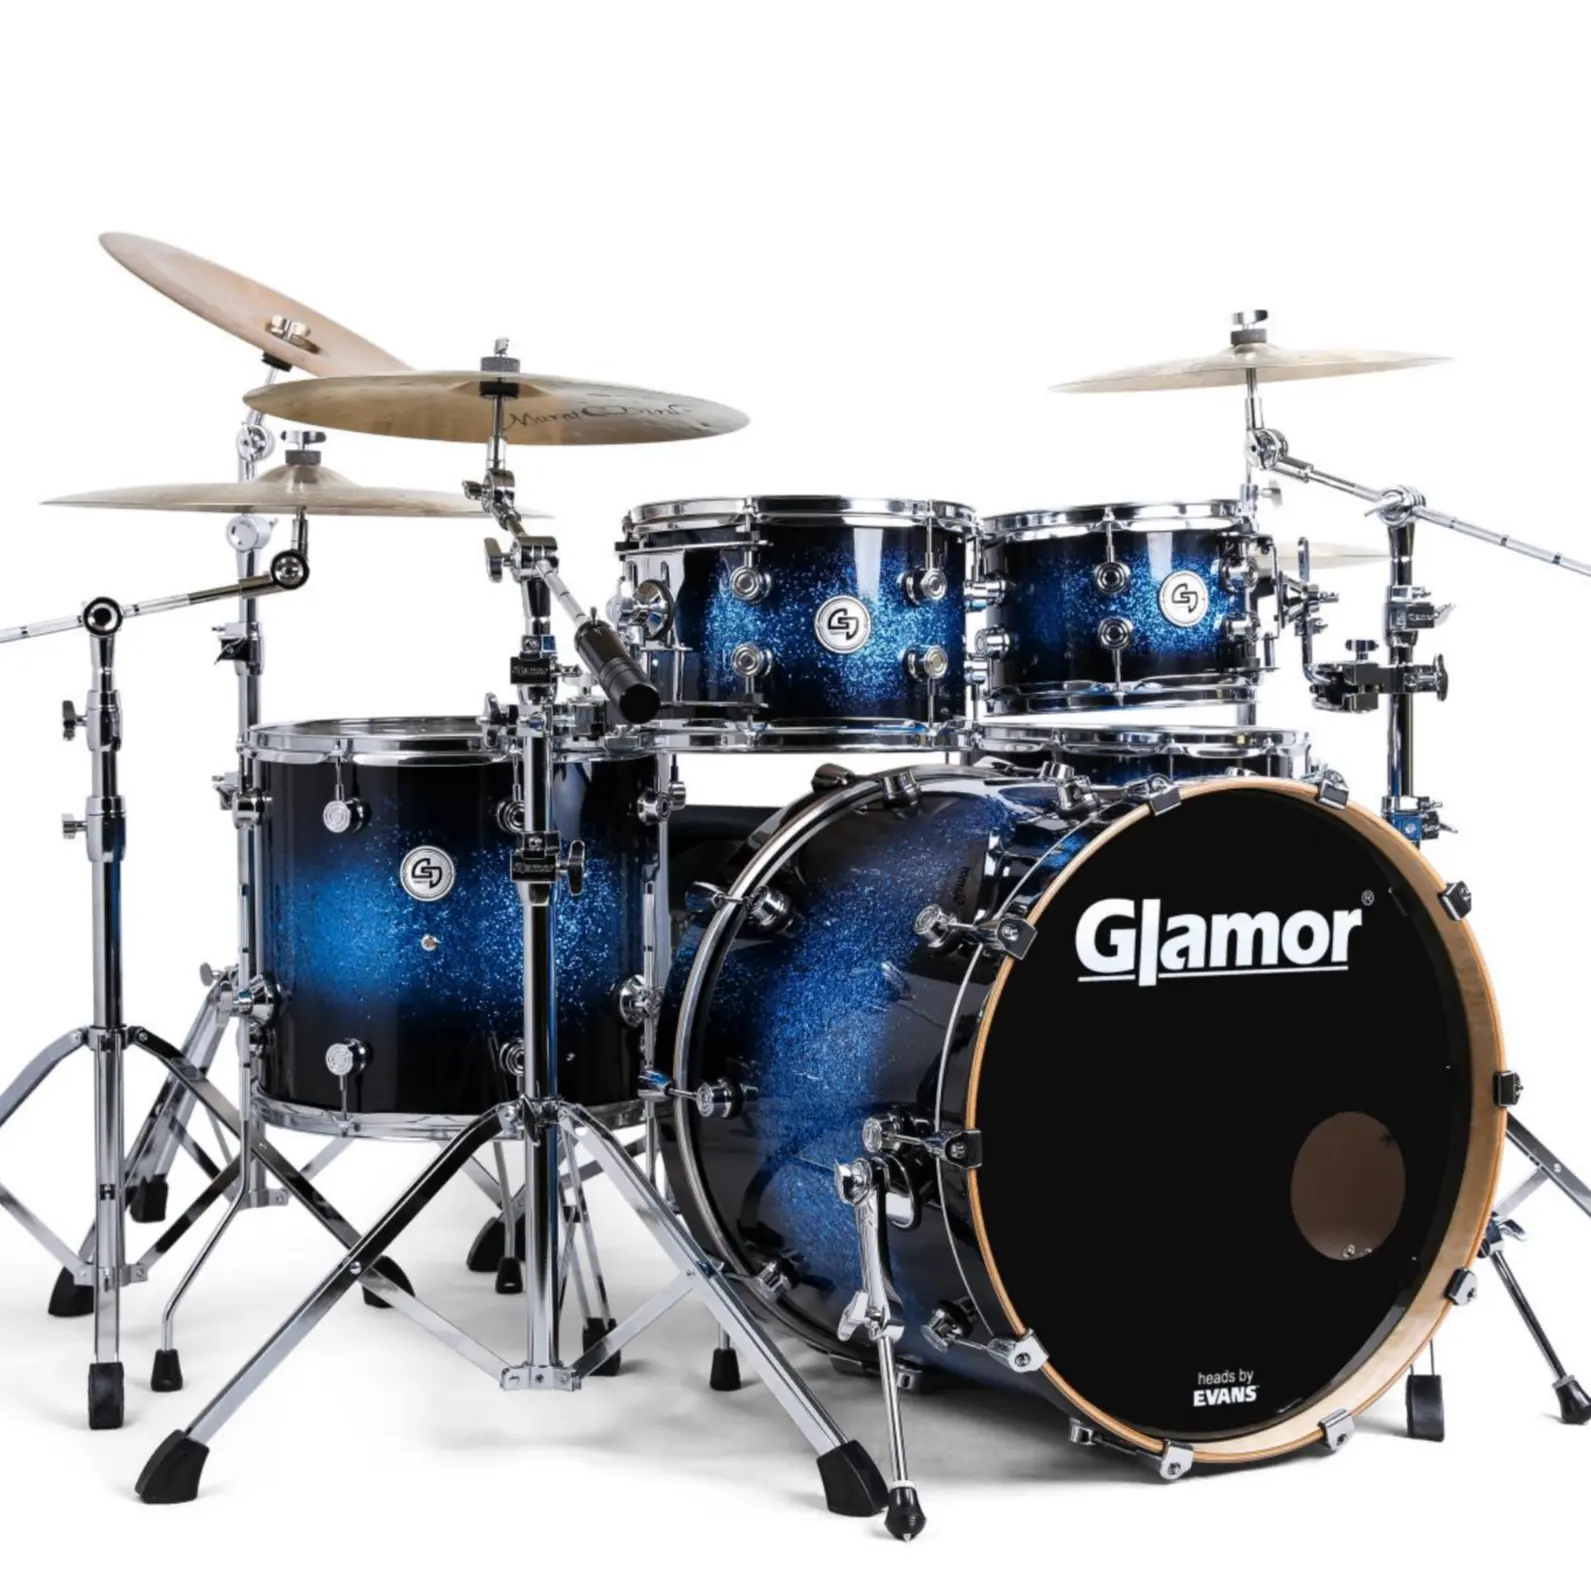 Glamor Drum Musical Instrument K5 Knight Series Drum Kits High-end Drum Sets For Education